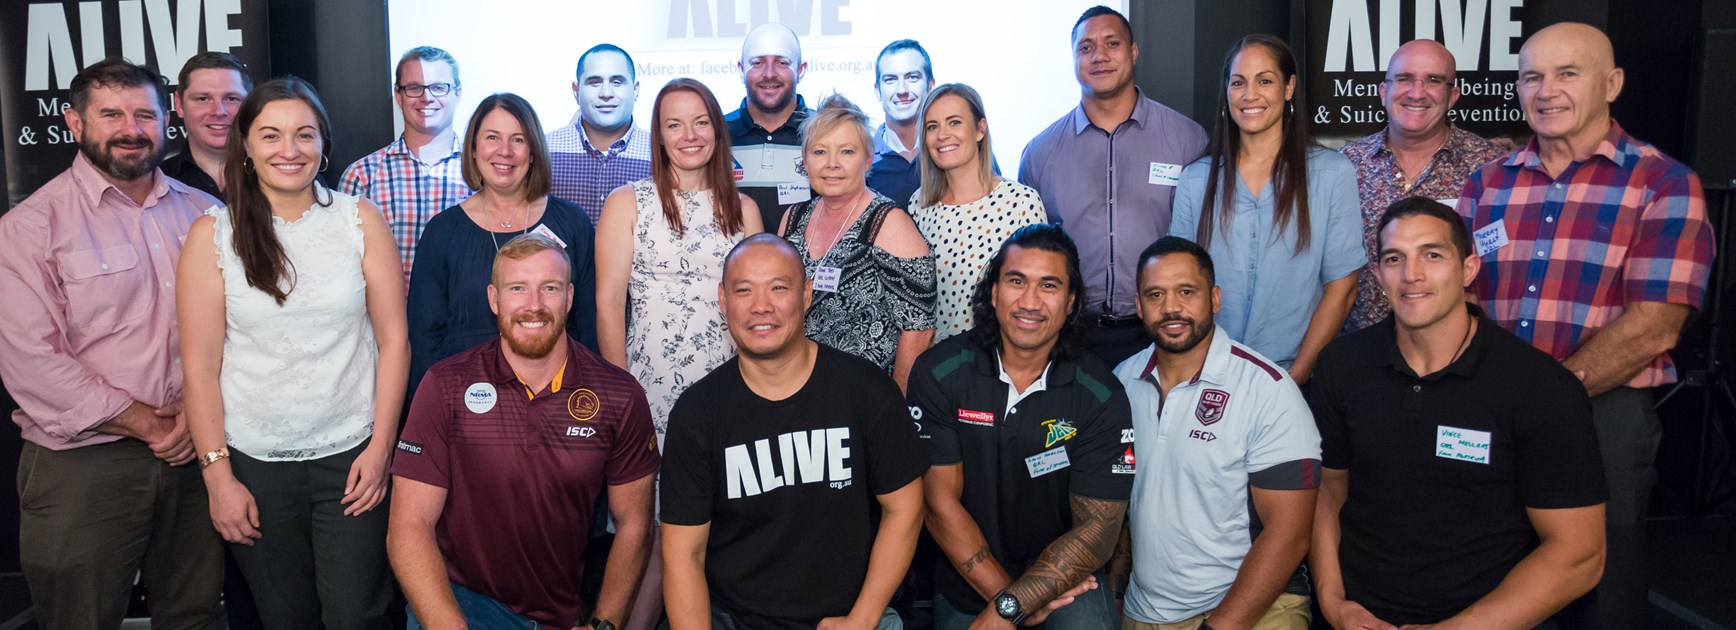 Inaugural QRL luncheon raises vital funds for ALIVE